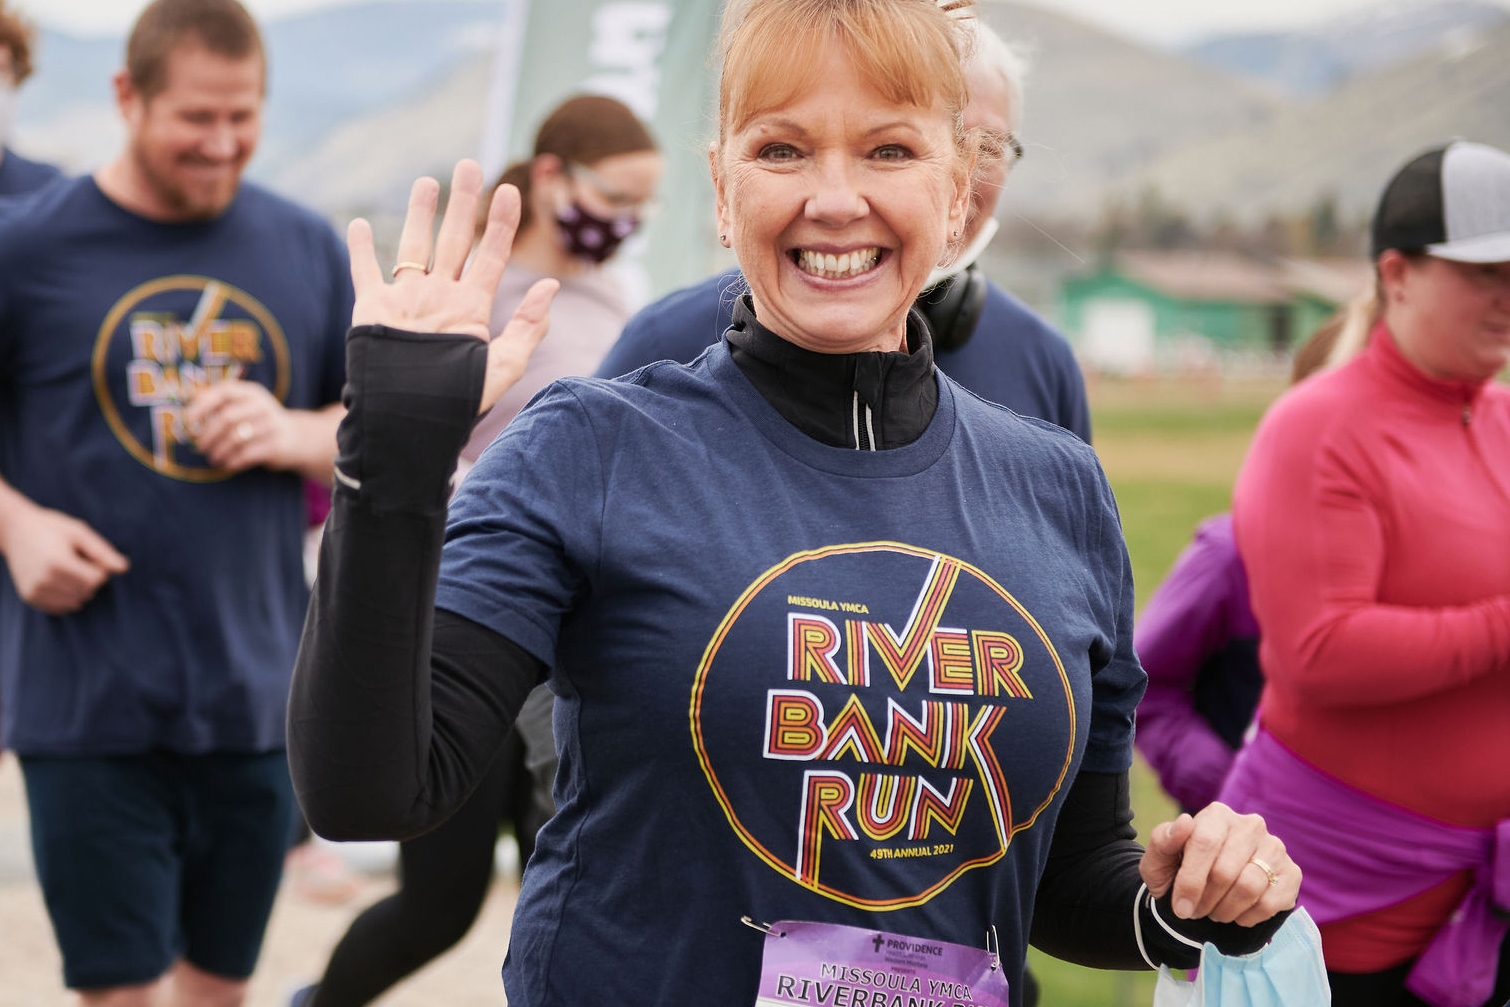 a woman smiling and waving at a camera while running a race and wearing a shirt that says riverbank run